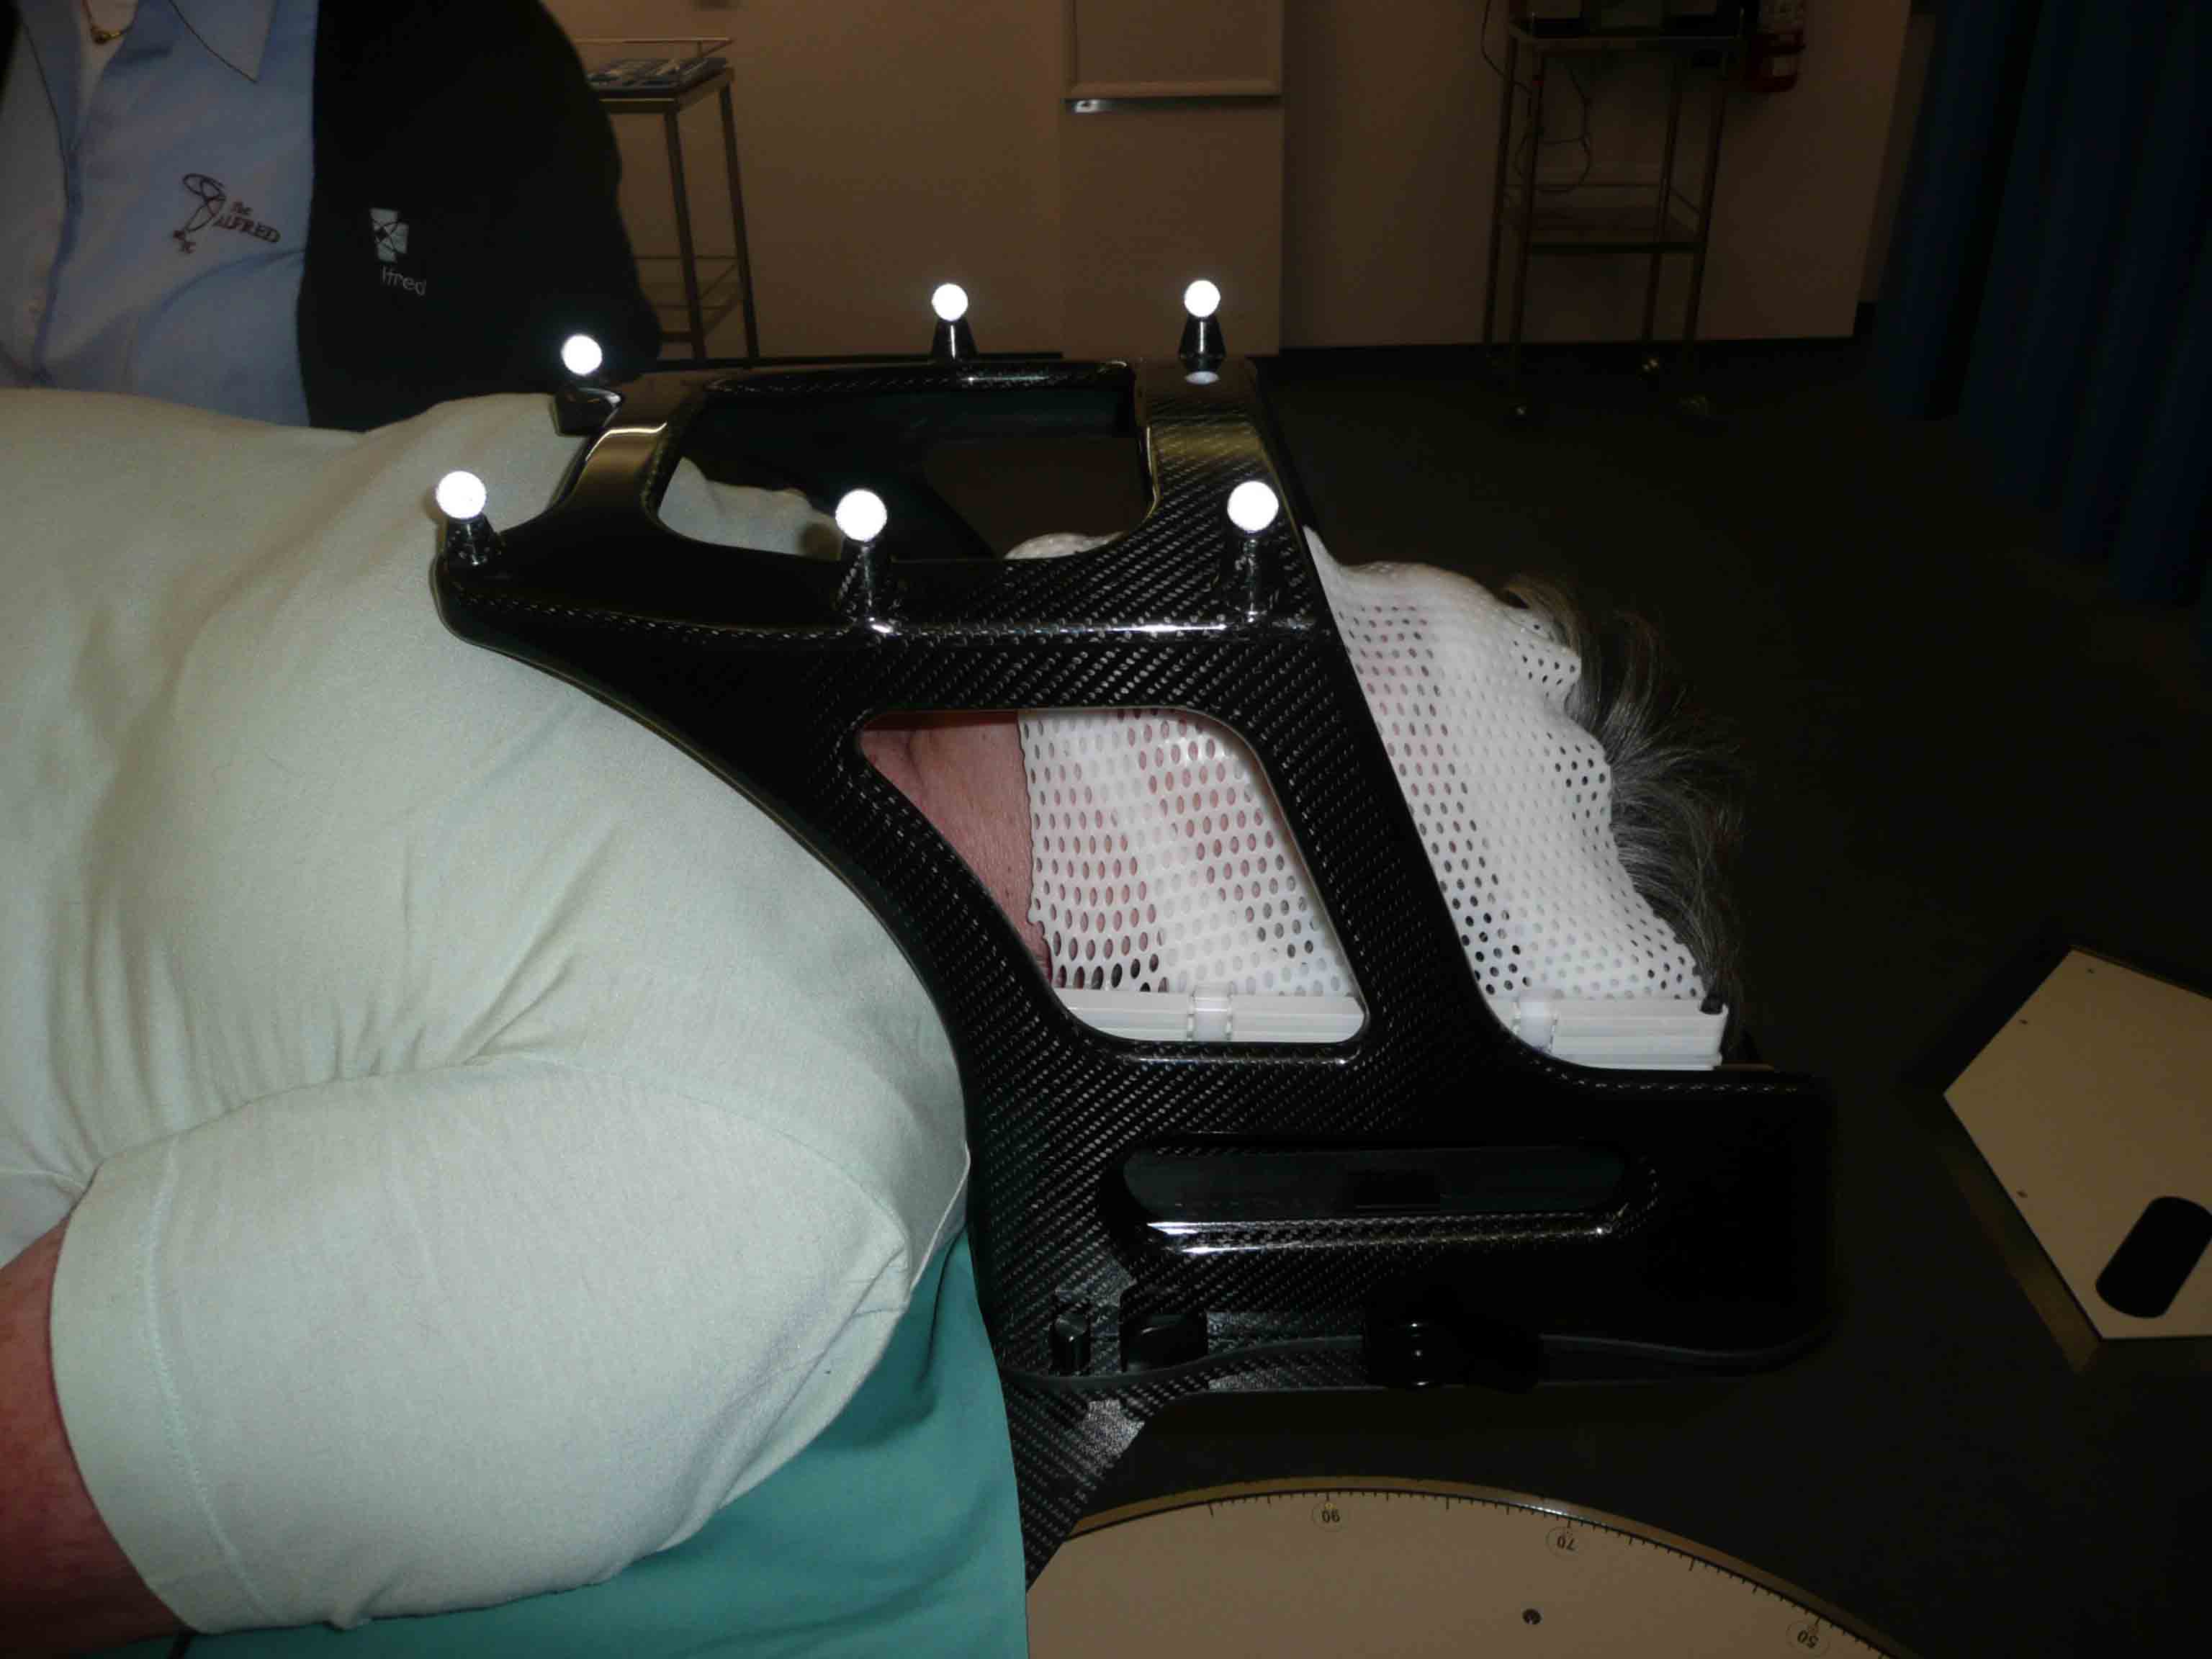 Radio Therapy Mask used for Acoustic Neuroma